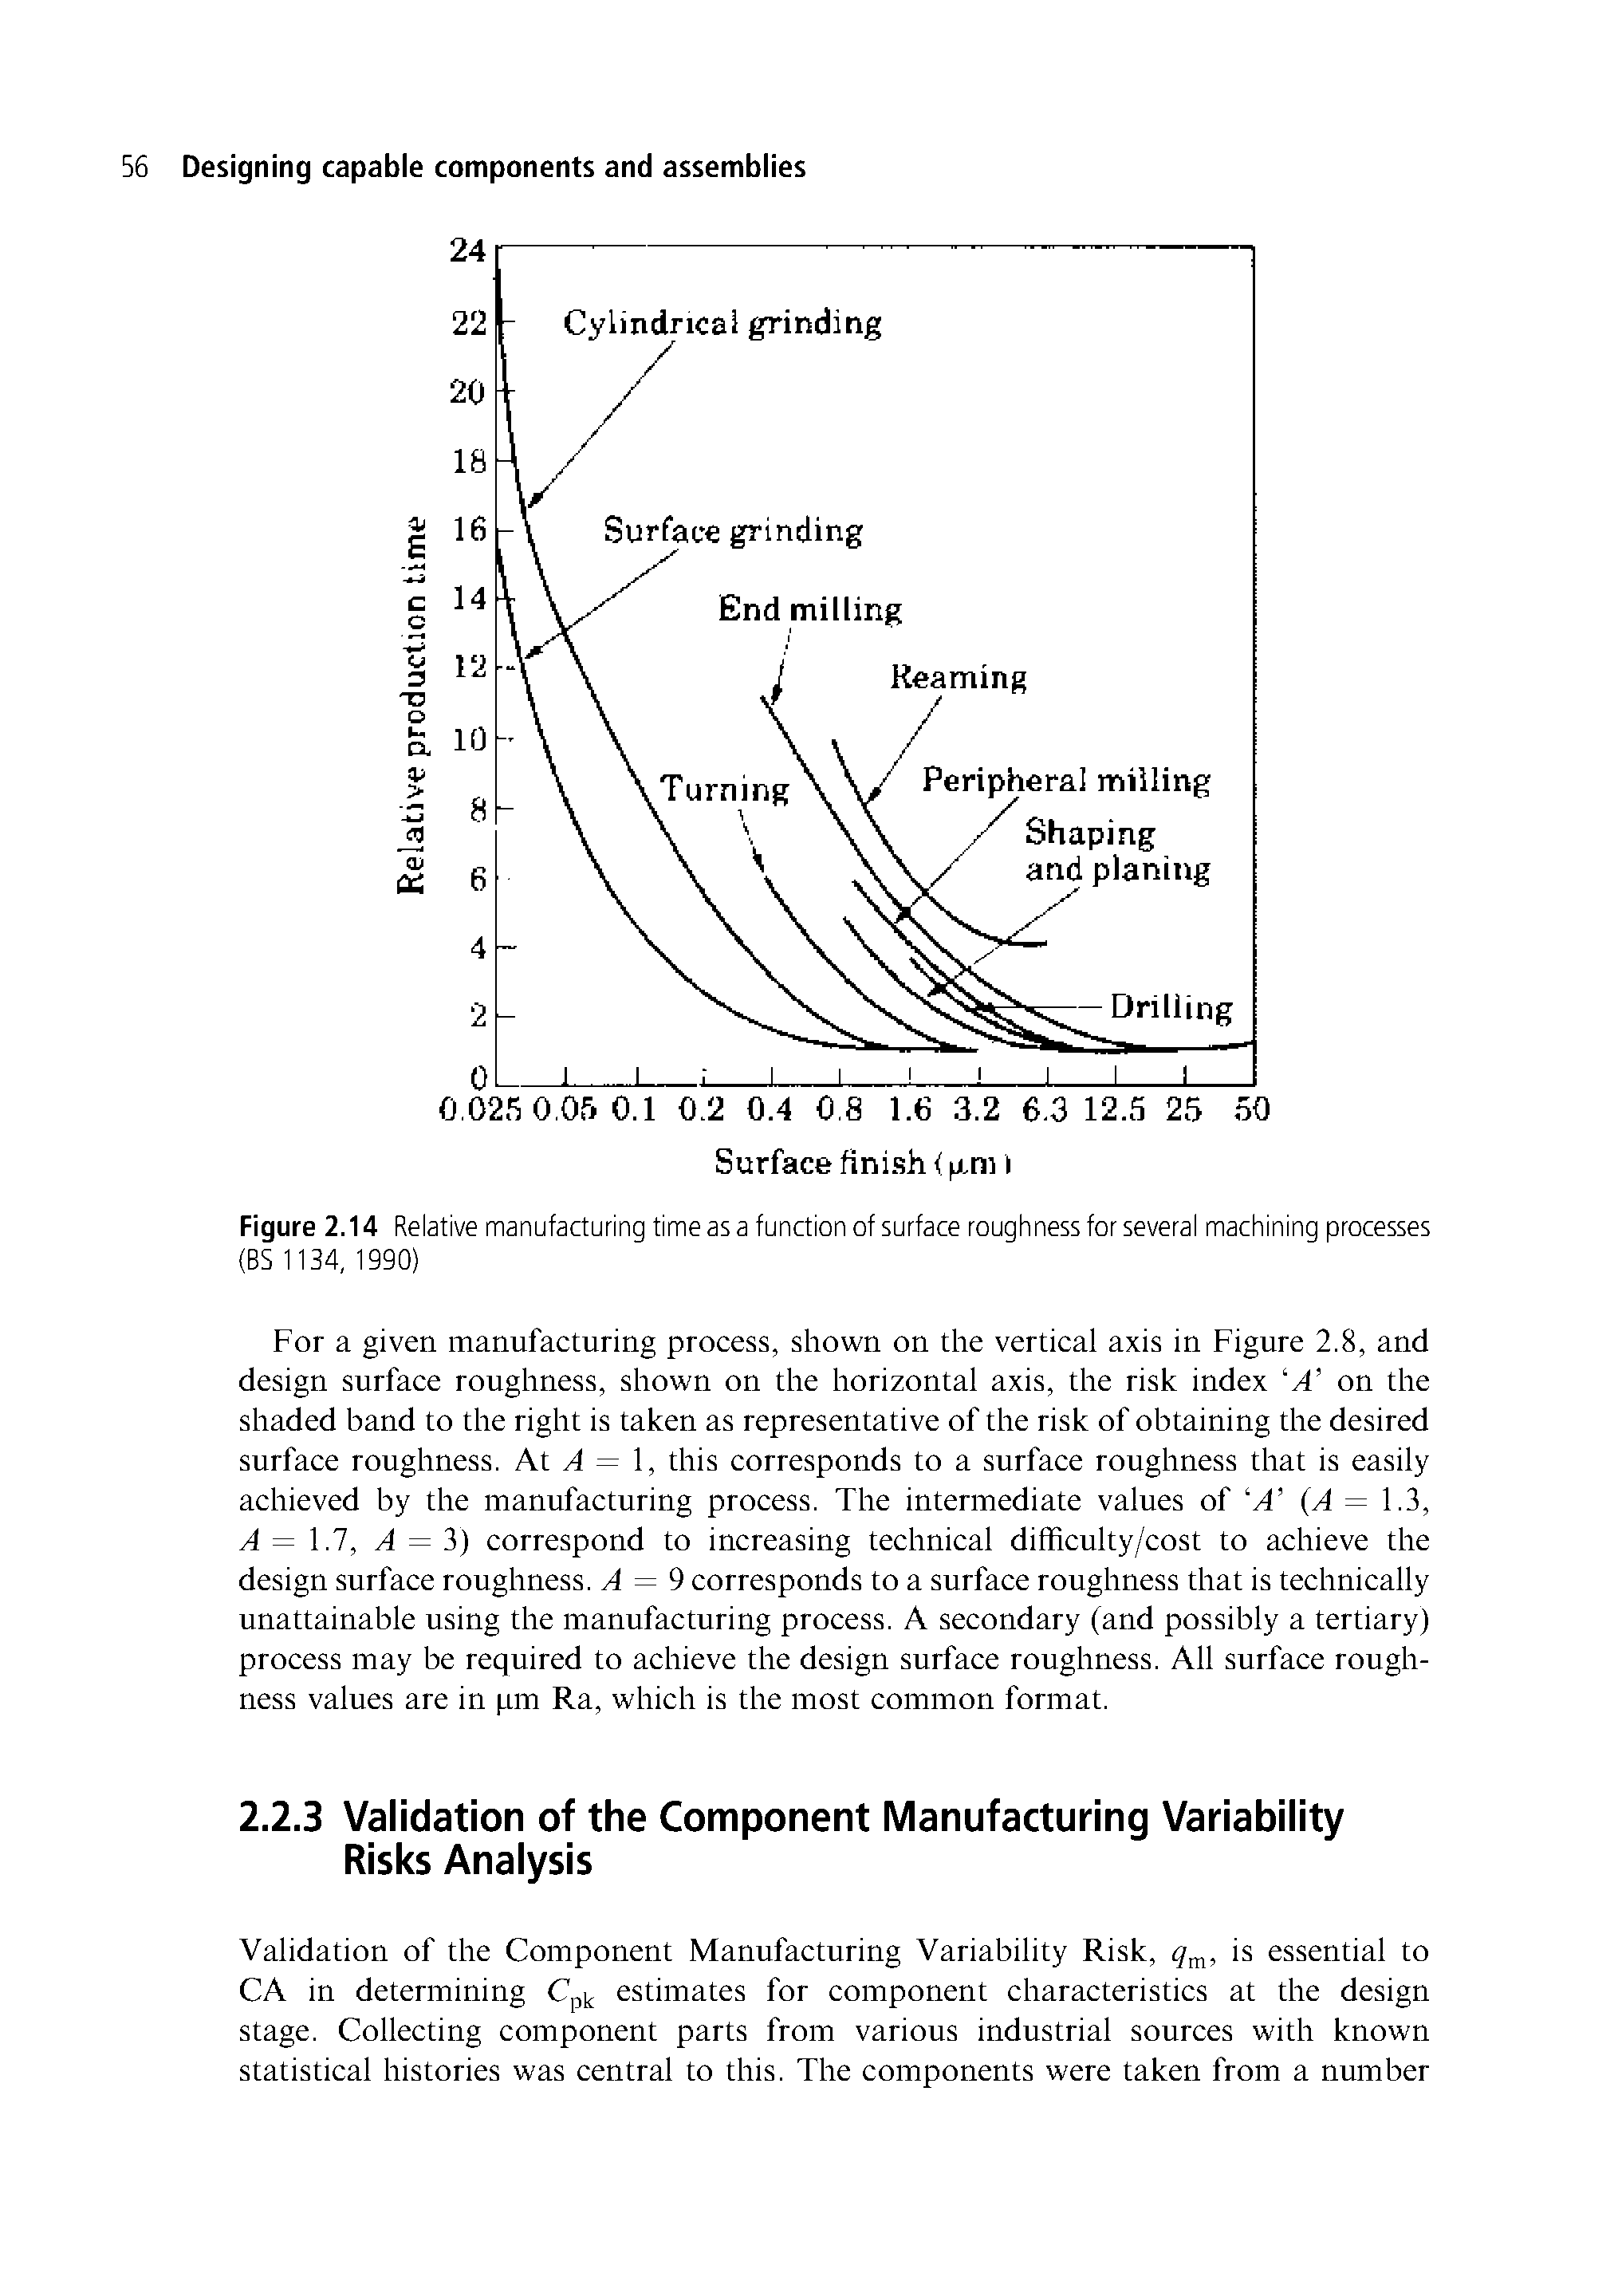 Figure 2.14 Relative manufacturing time as a function of surface roughness for several machining processes (BS 1134, 1990)...